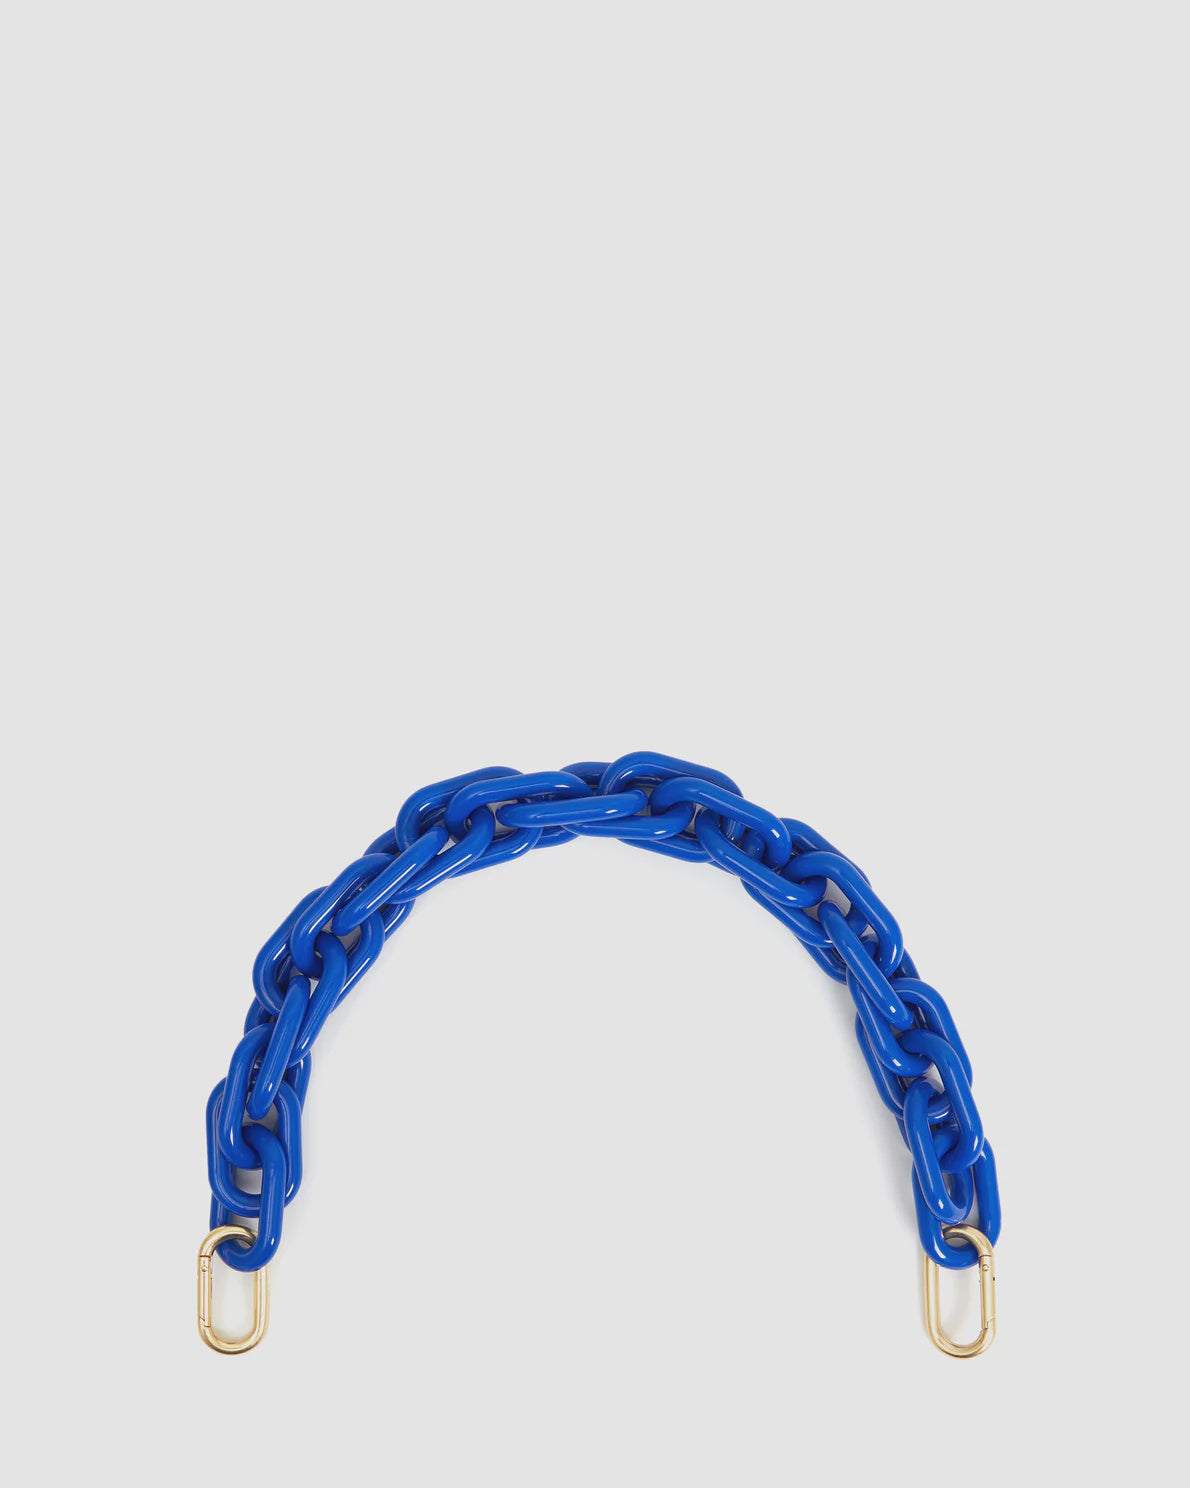 A blue, chunky resin chain strap measuring 17" long features brass spring links and gold-colored clasps at both ends, laid out in a curved shape against a plain white background. This is the Shortie Strap by Clare Vivier.